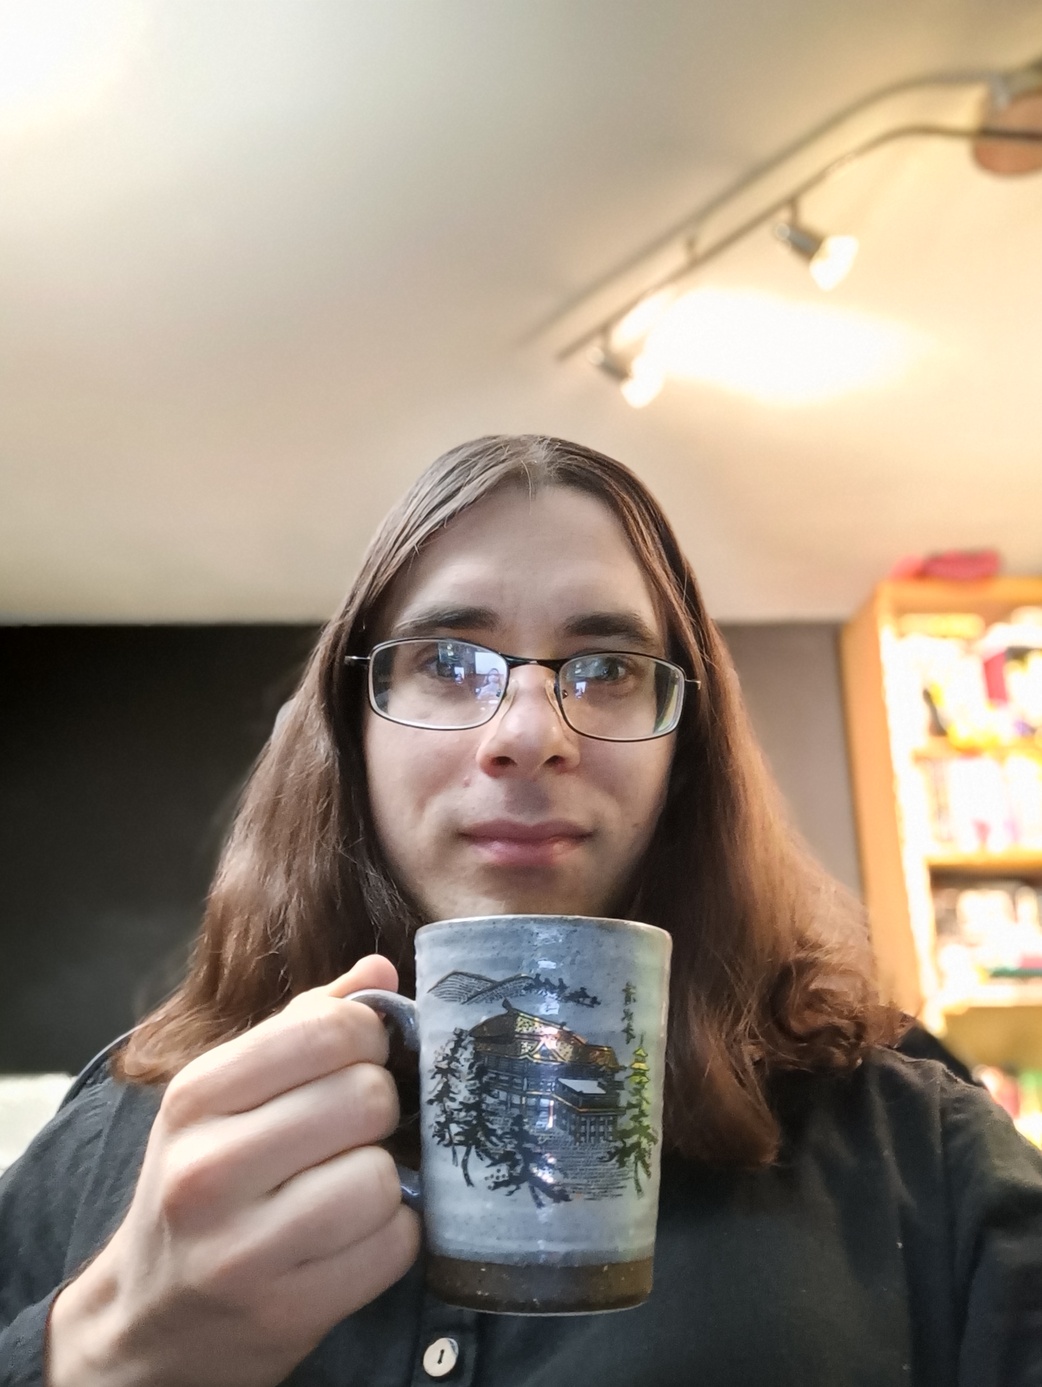 Enby with a cup of tea. On the cup is a picture of a Japanese-style house surrounded by trees. The enby has shoulder-length brown hair and is wearing glasses, which are slightly slanted.